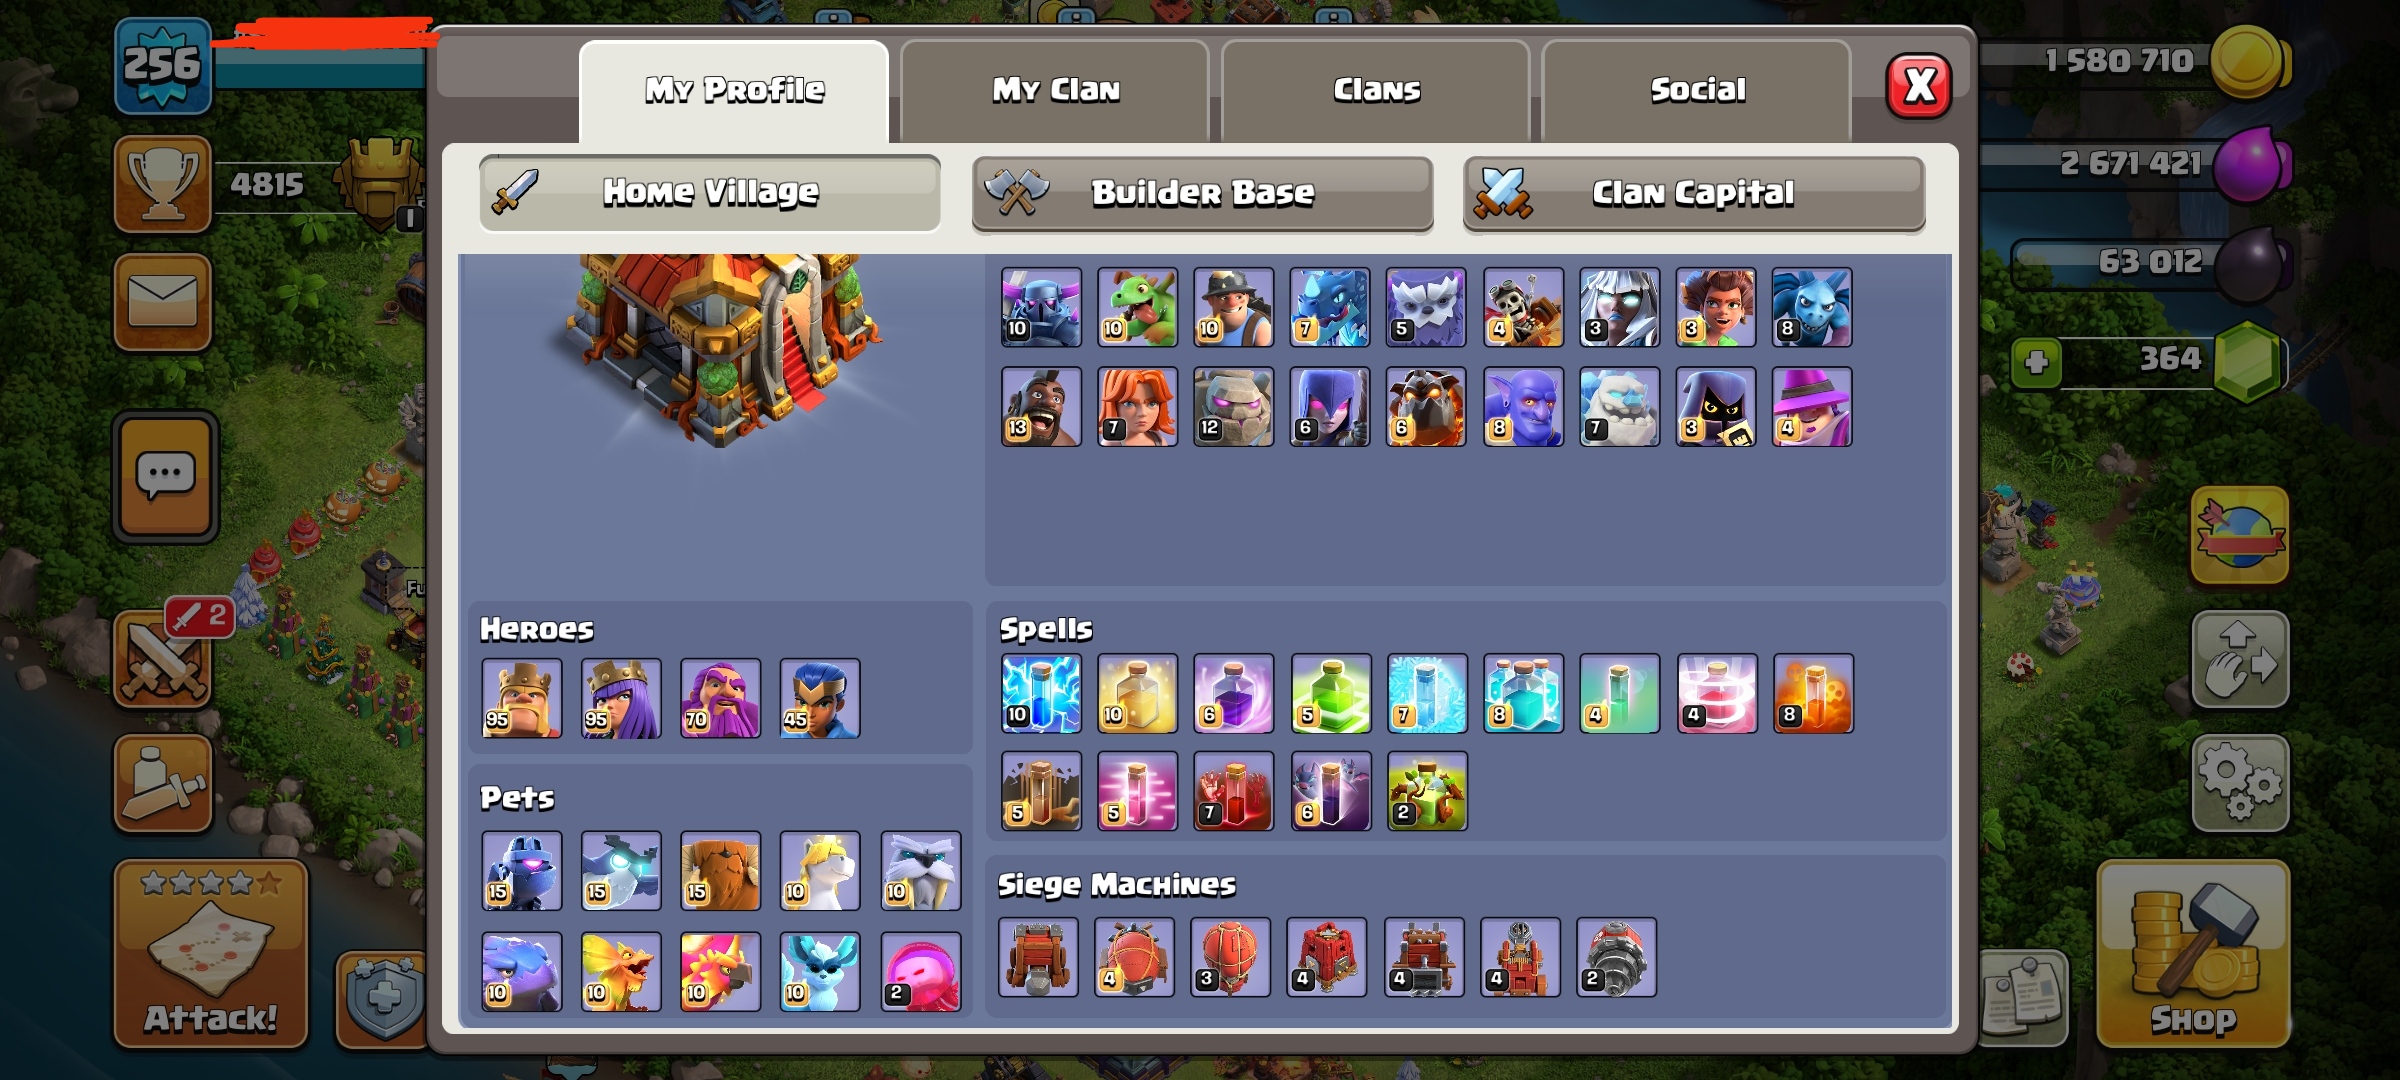 98% Max Th16, Xp 256, All Heroes Max, Name Change Free, 2970 WAR STAR, PB 6104, LT 13396, GIANT GAUNTLET & FROZEN ARROW, Android dan iOS